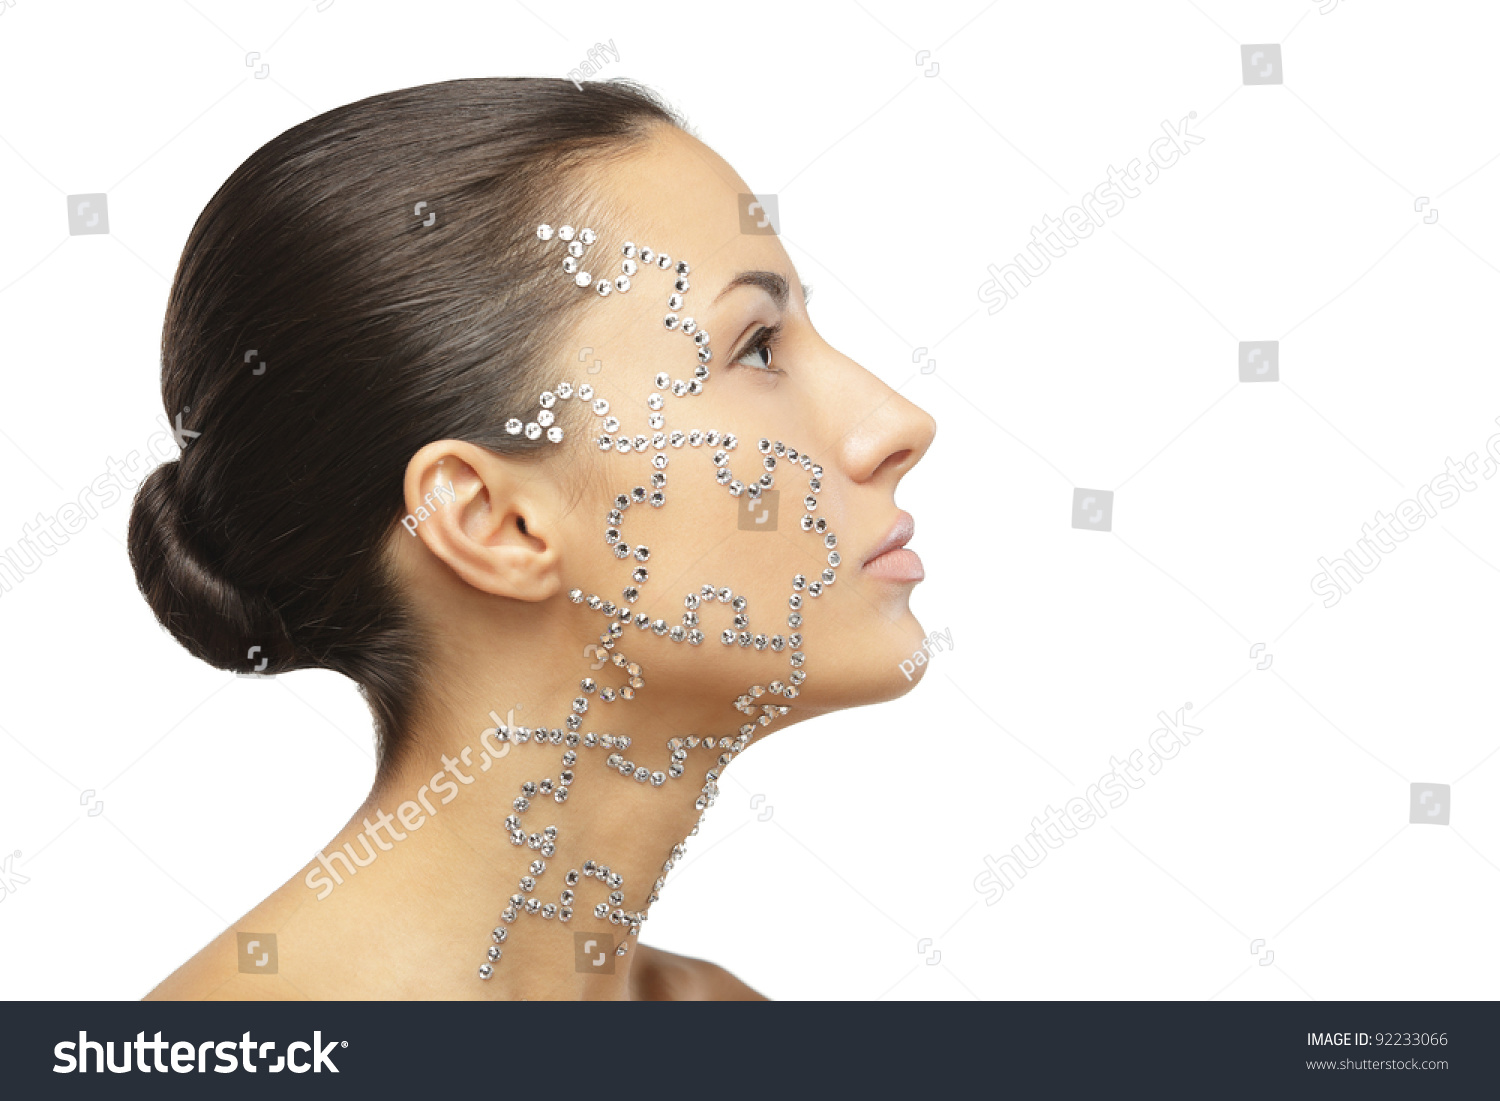 Side View Portrait Of Female With Beauty Crystal Puzzle On Her Face